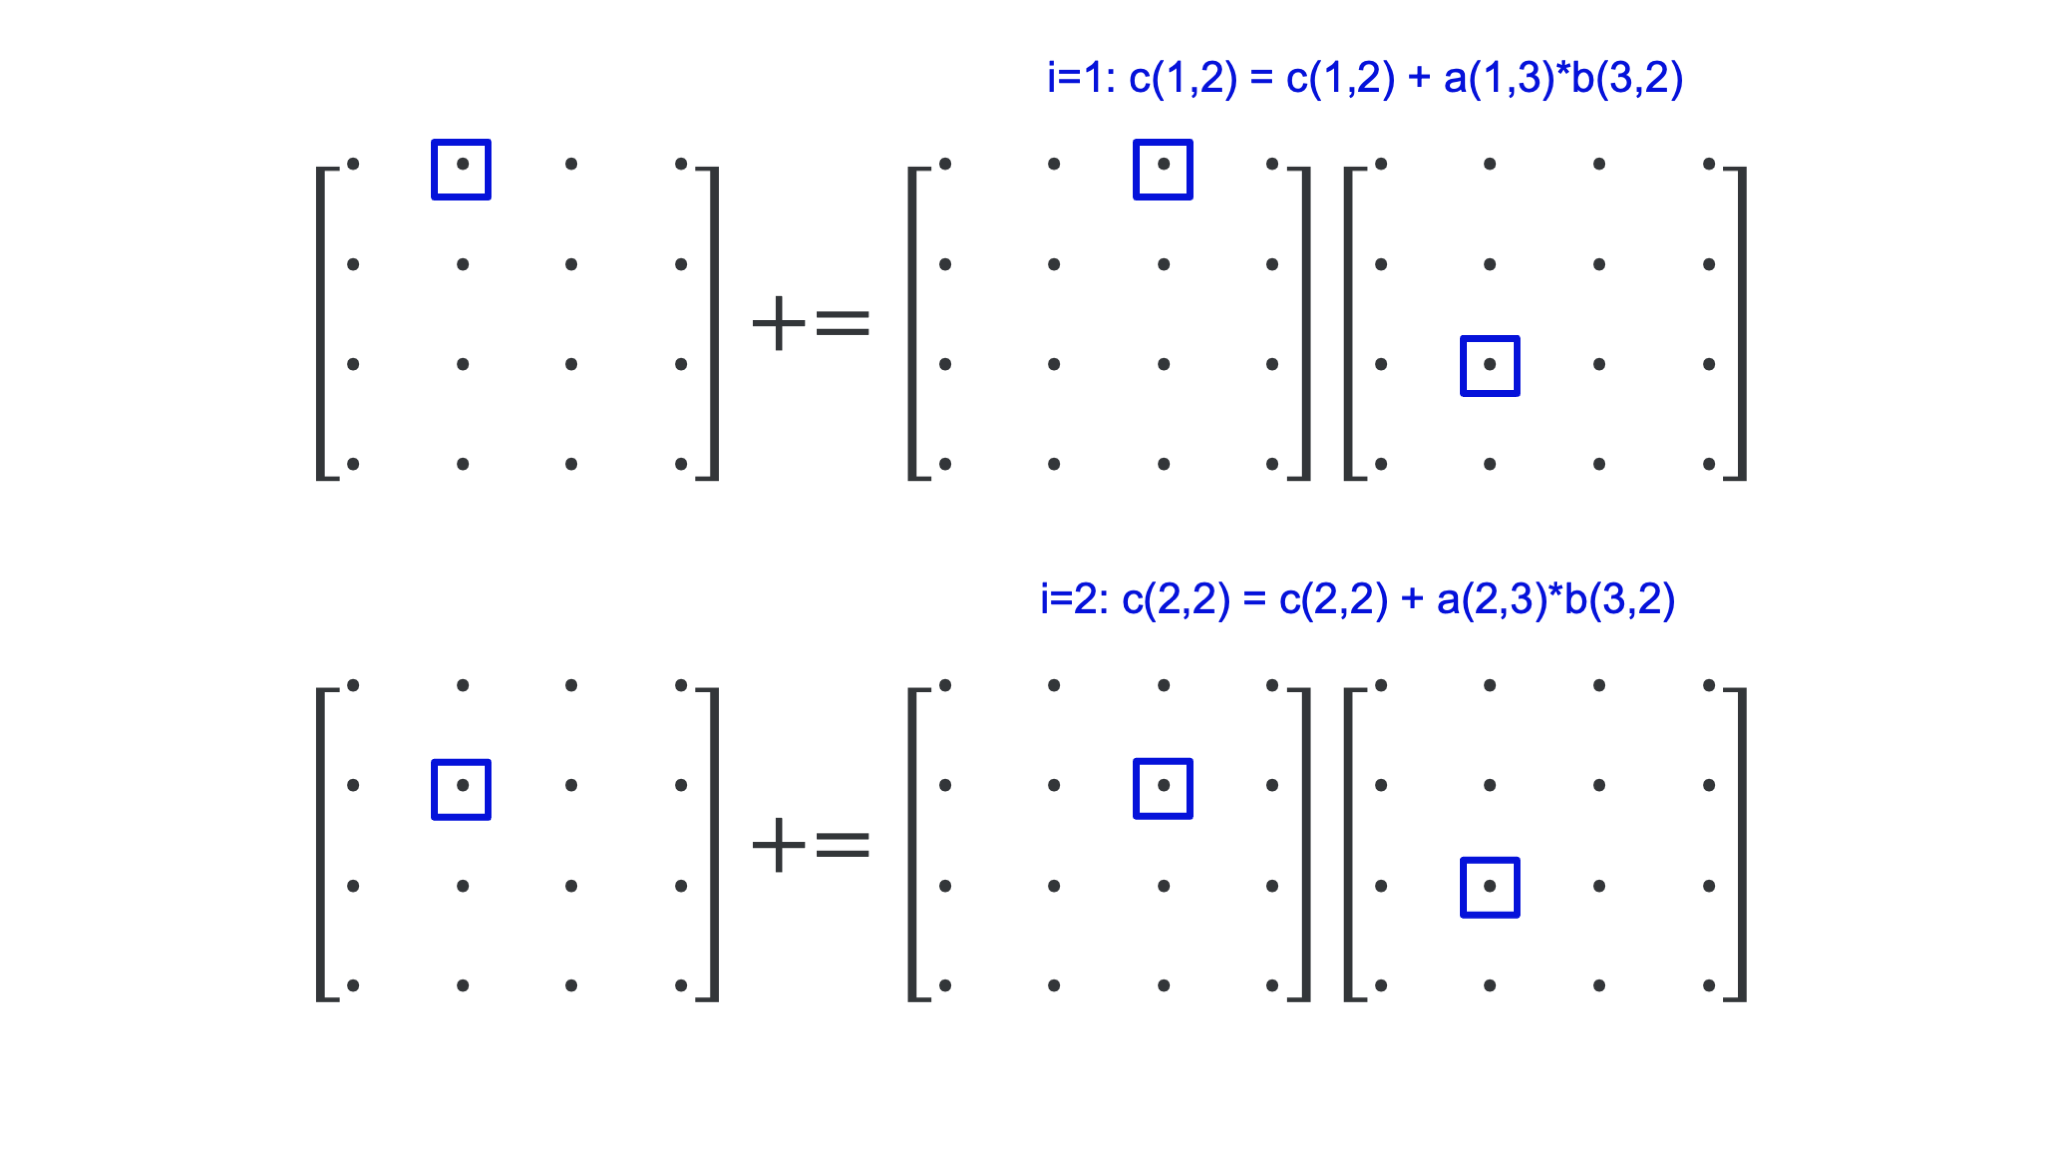 Steps 1 and 2 of the matrix multiplication